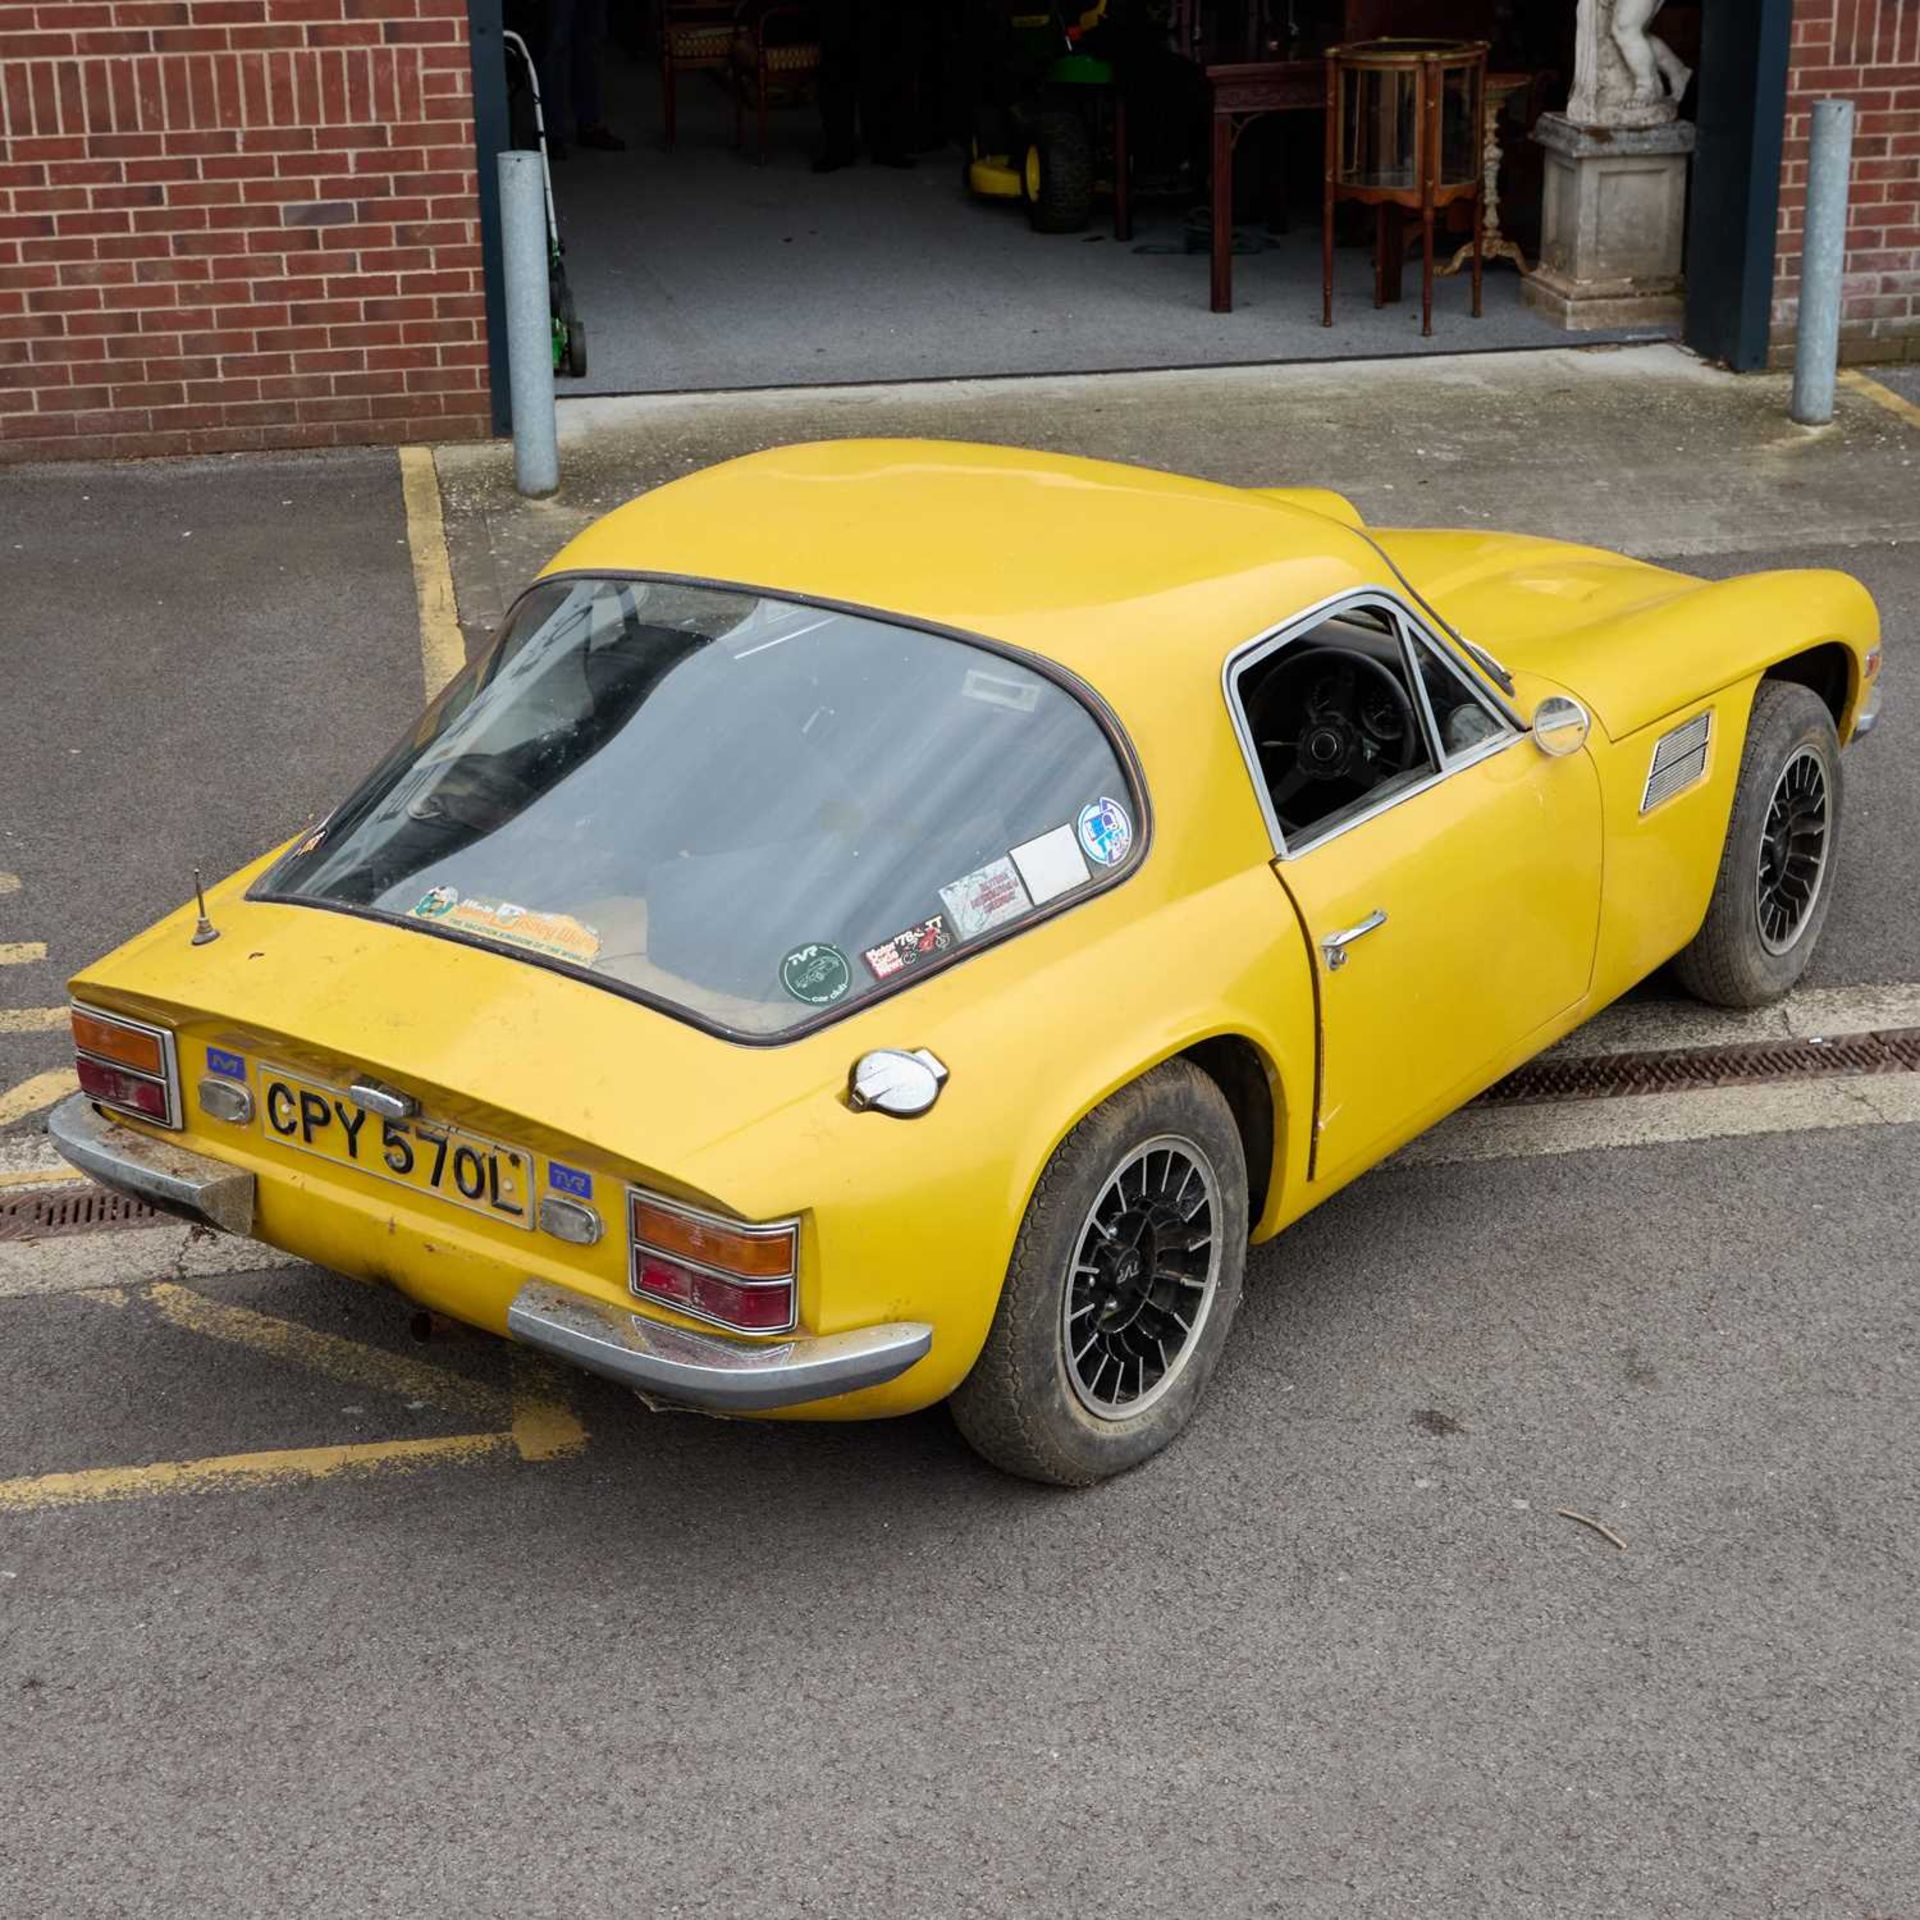 A 1973 TVR - Image 13 of 27